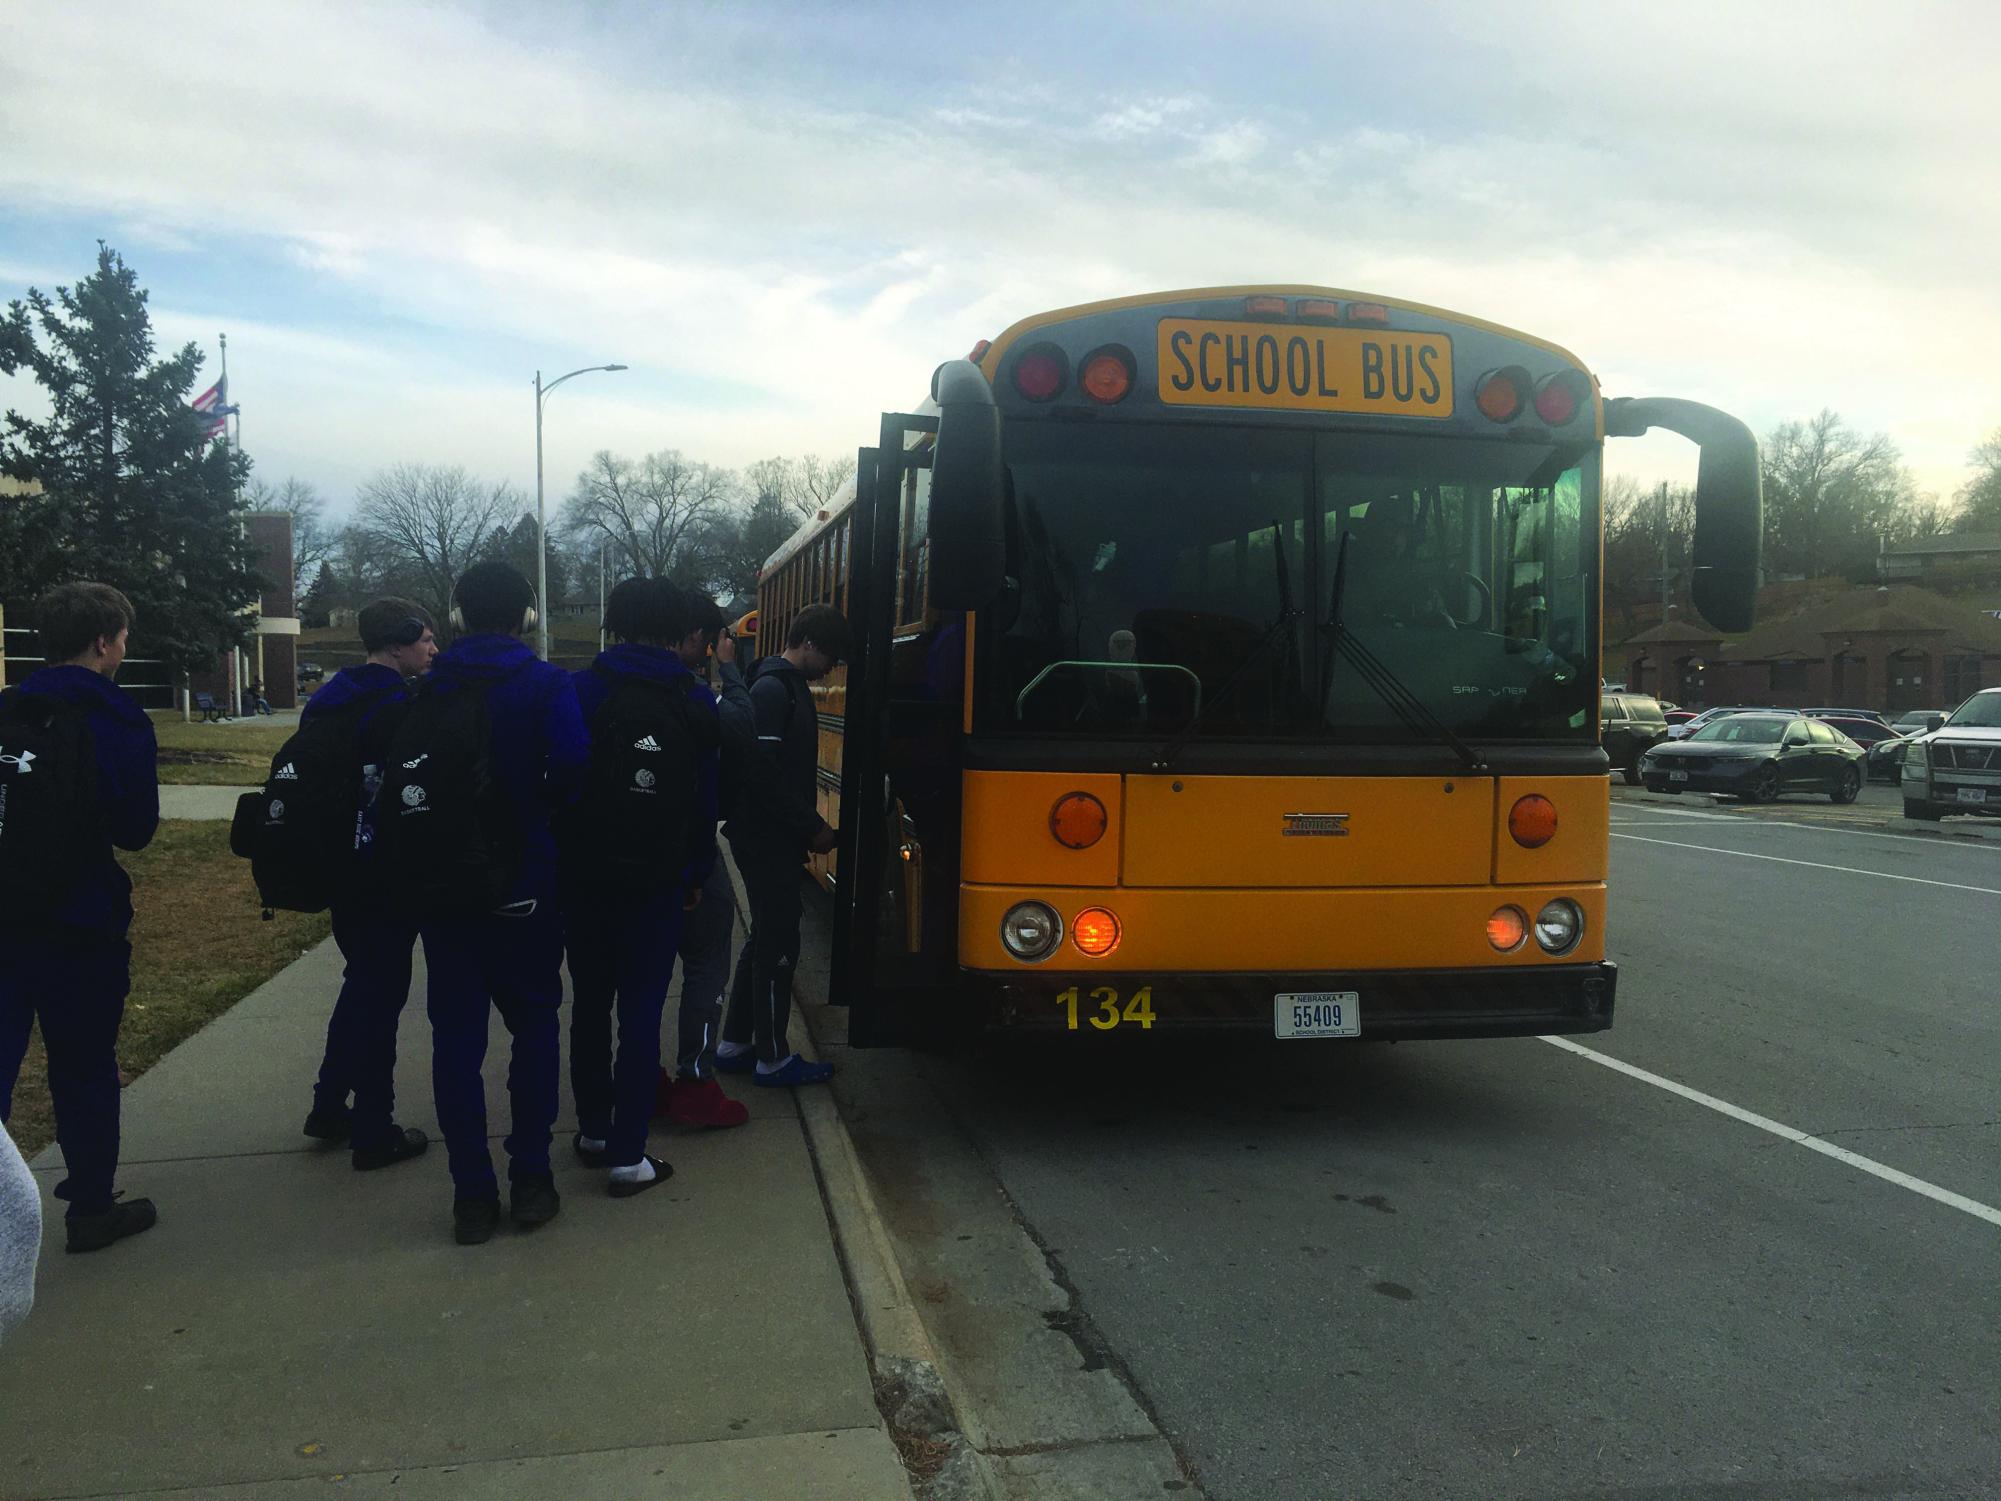 On the road. Members of the Bellevue East boys basketball team board bus 134. Buses are made to keep passengers safe, but for bus driver Dave Aiken, it also helps to be quiet while he’s driving. “Kind of a general rule, just for people who are riding, is to use a lot of courtesy and try to keep the voices and stuff down,” Aiken said. 